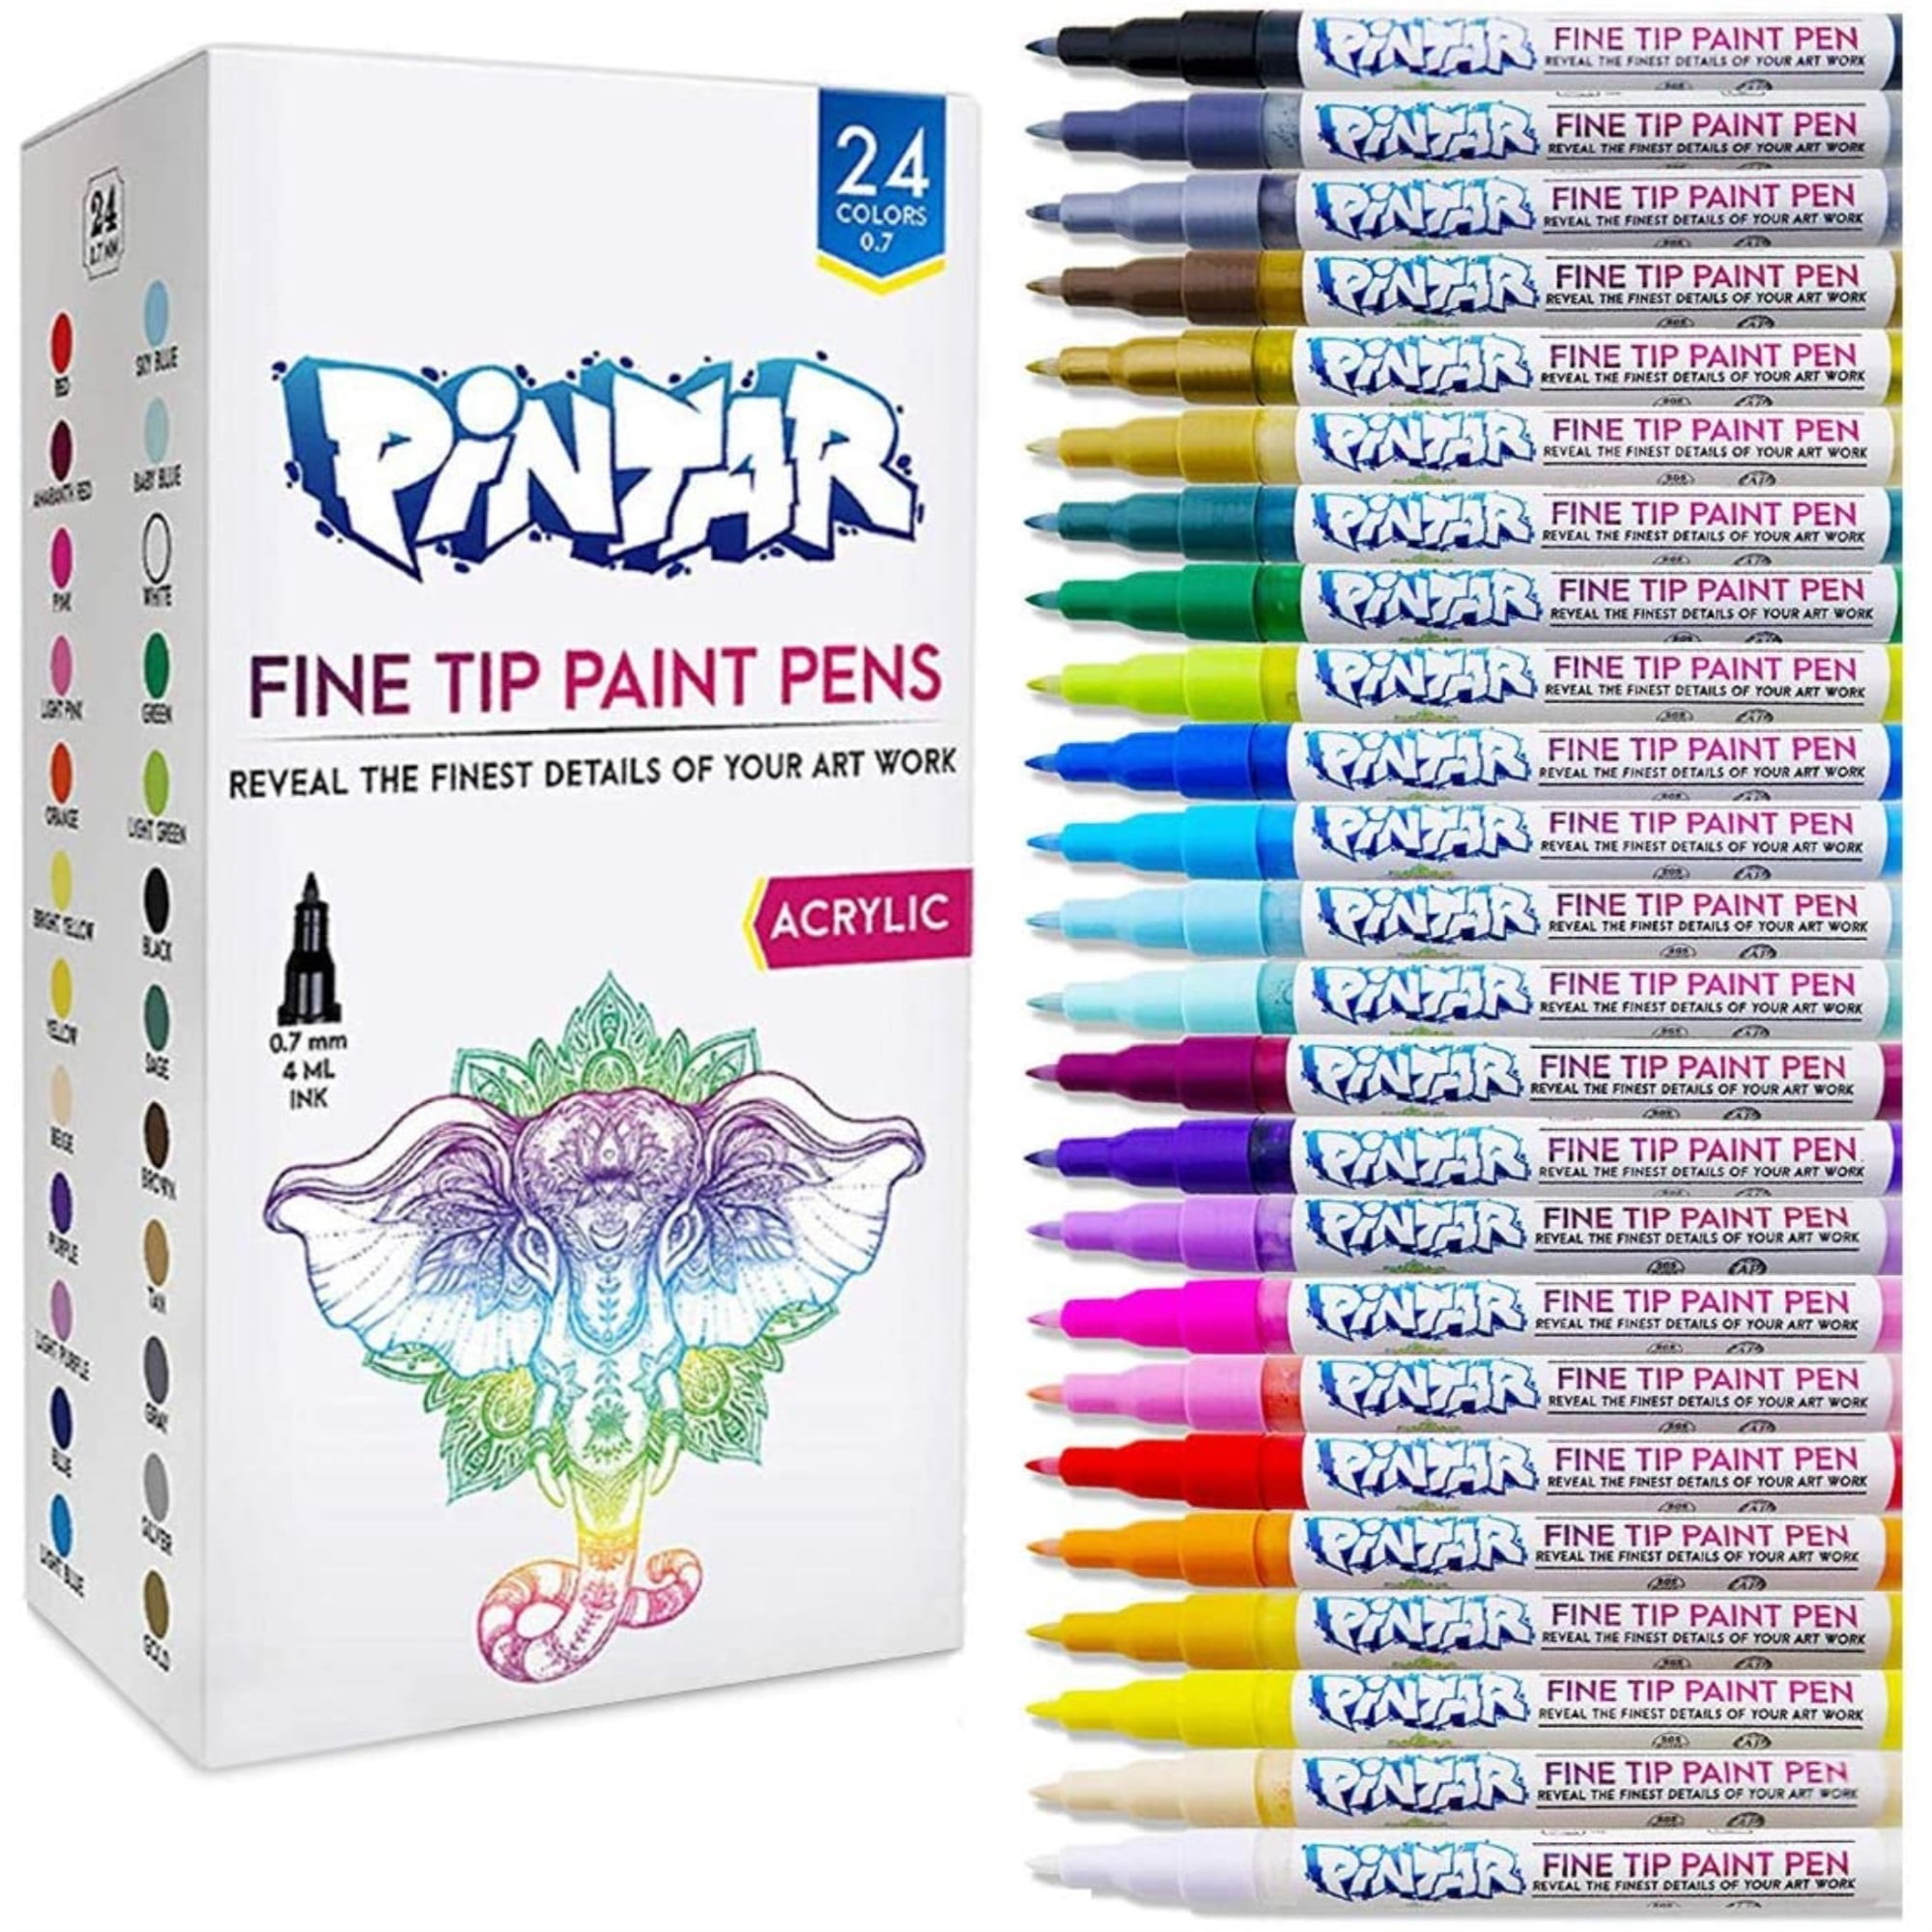 Metal and Ceramic Works Wood Glass Fine Tip Paint pens for Rock Painting 